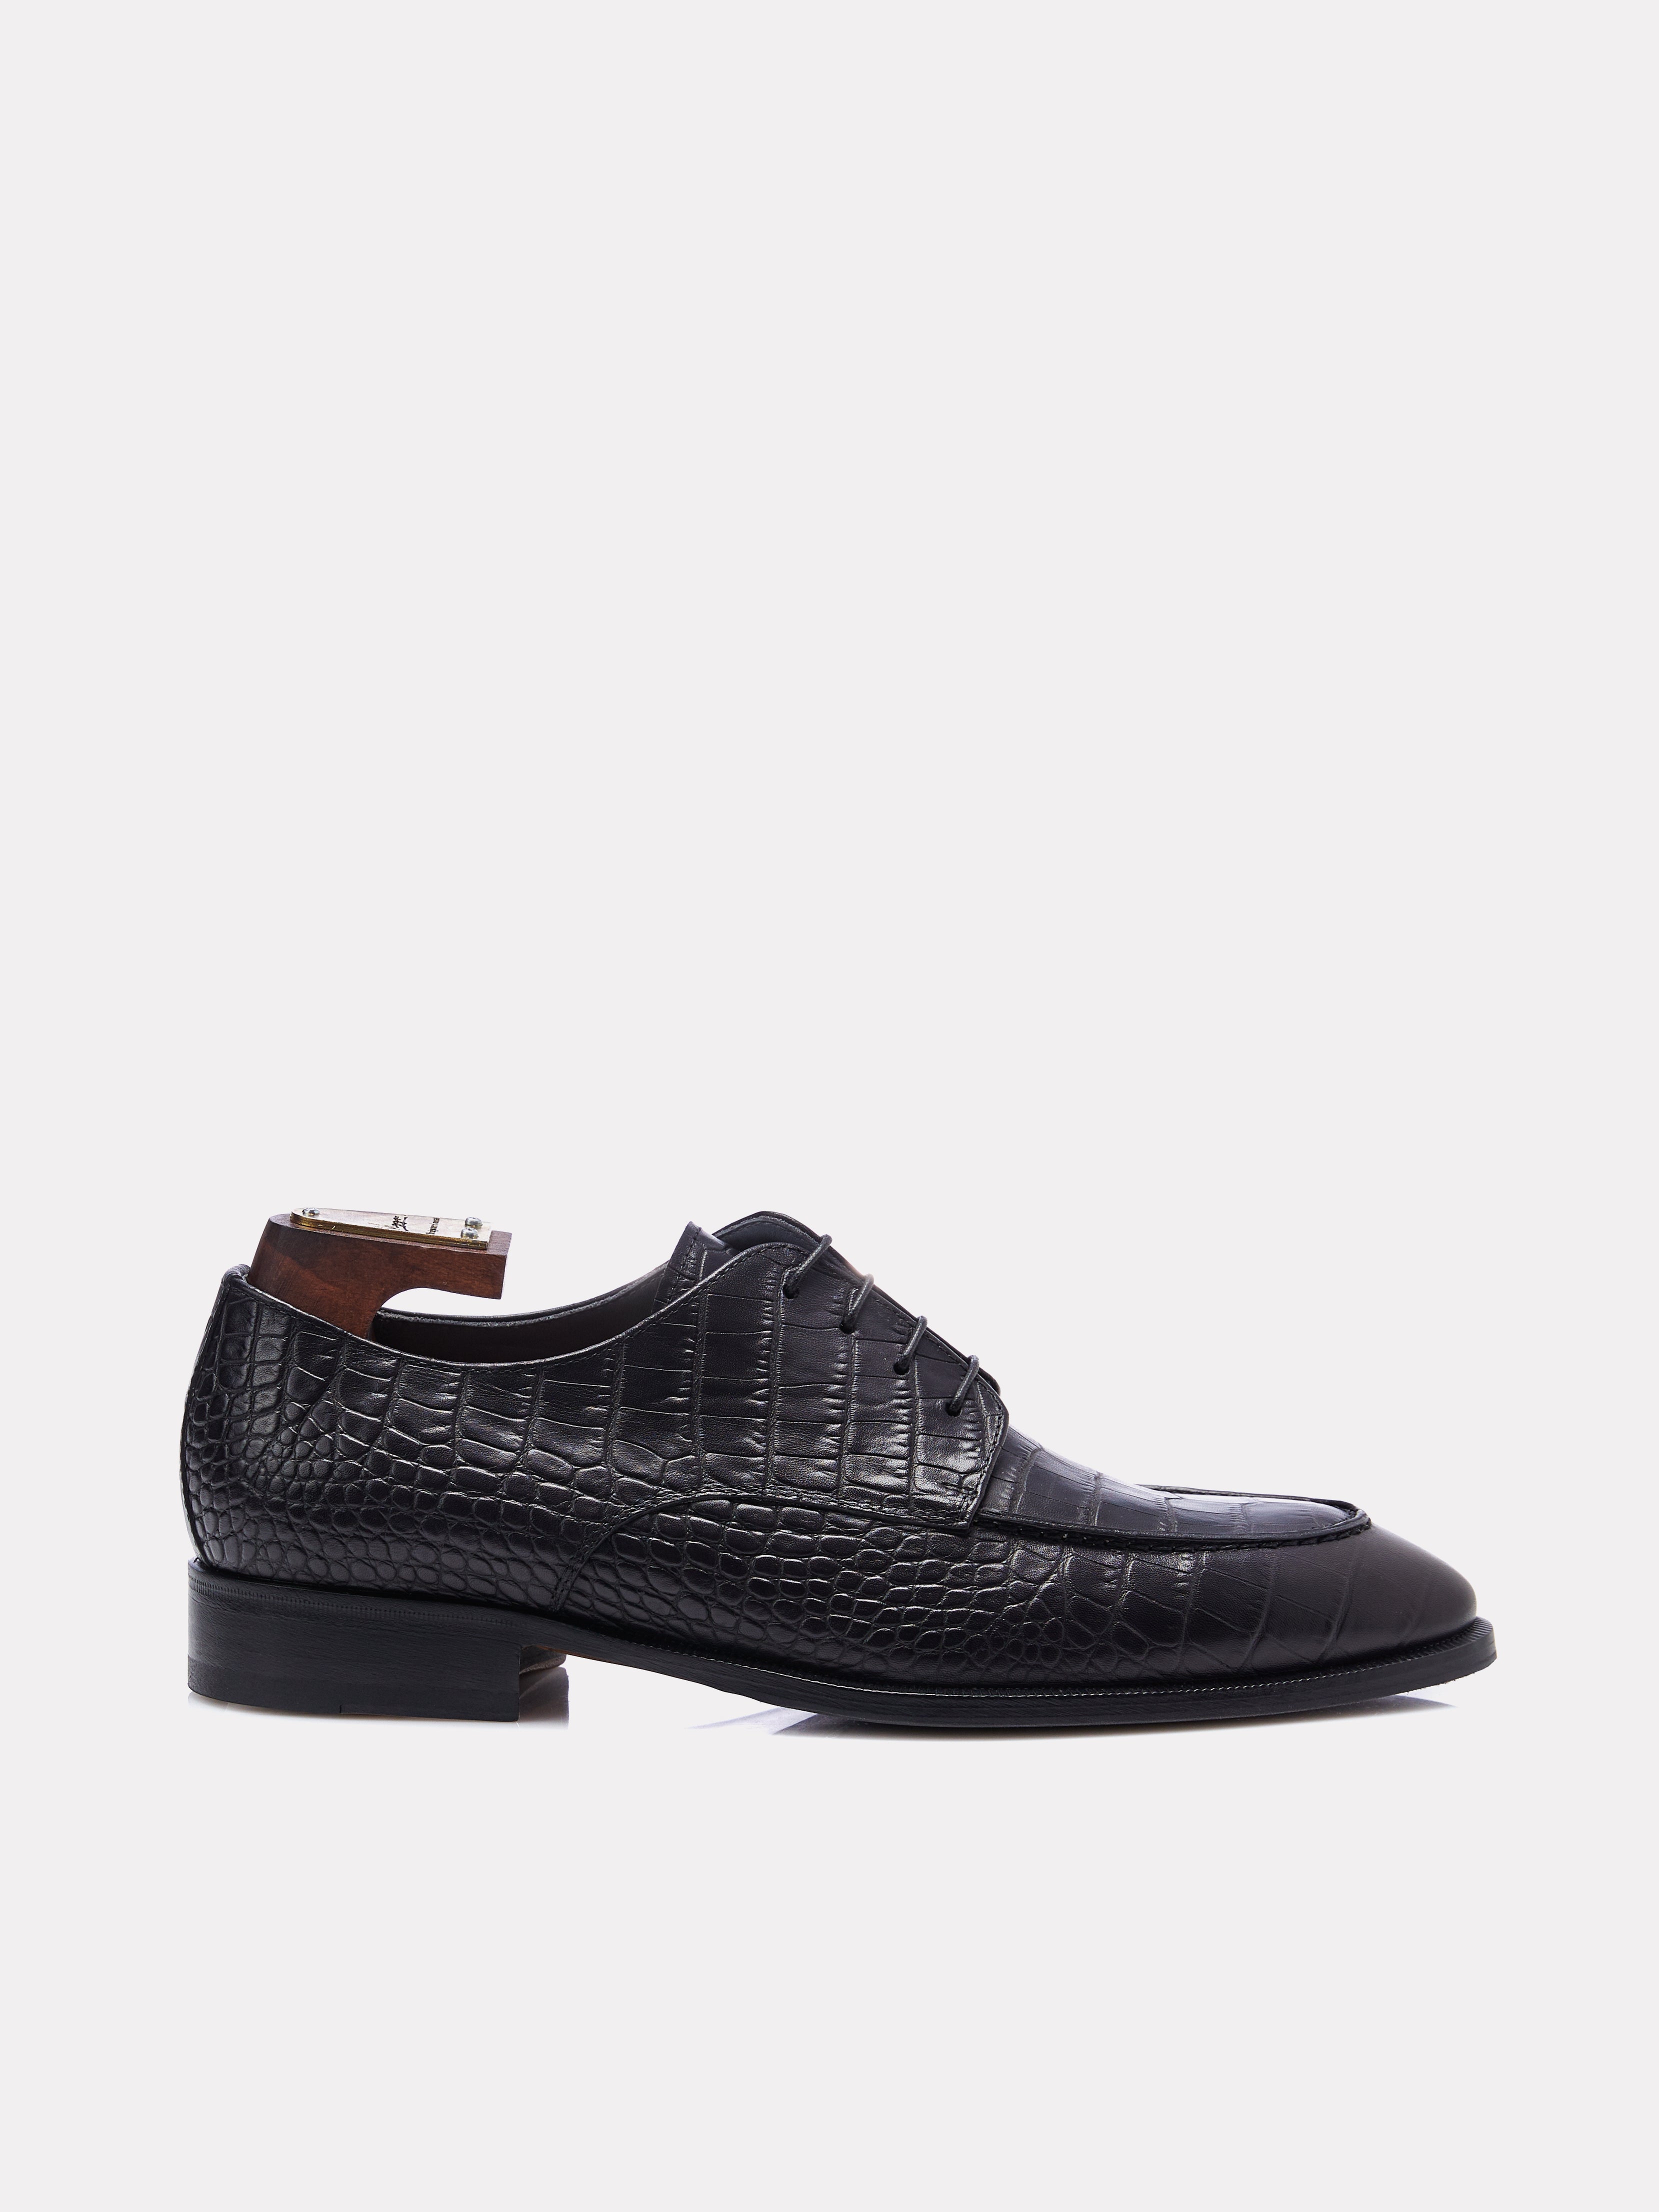 Black derby shoes with croc pattern